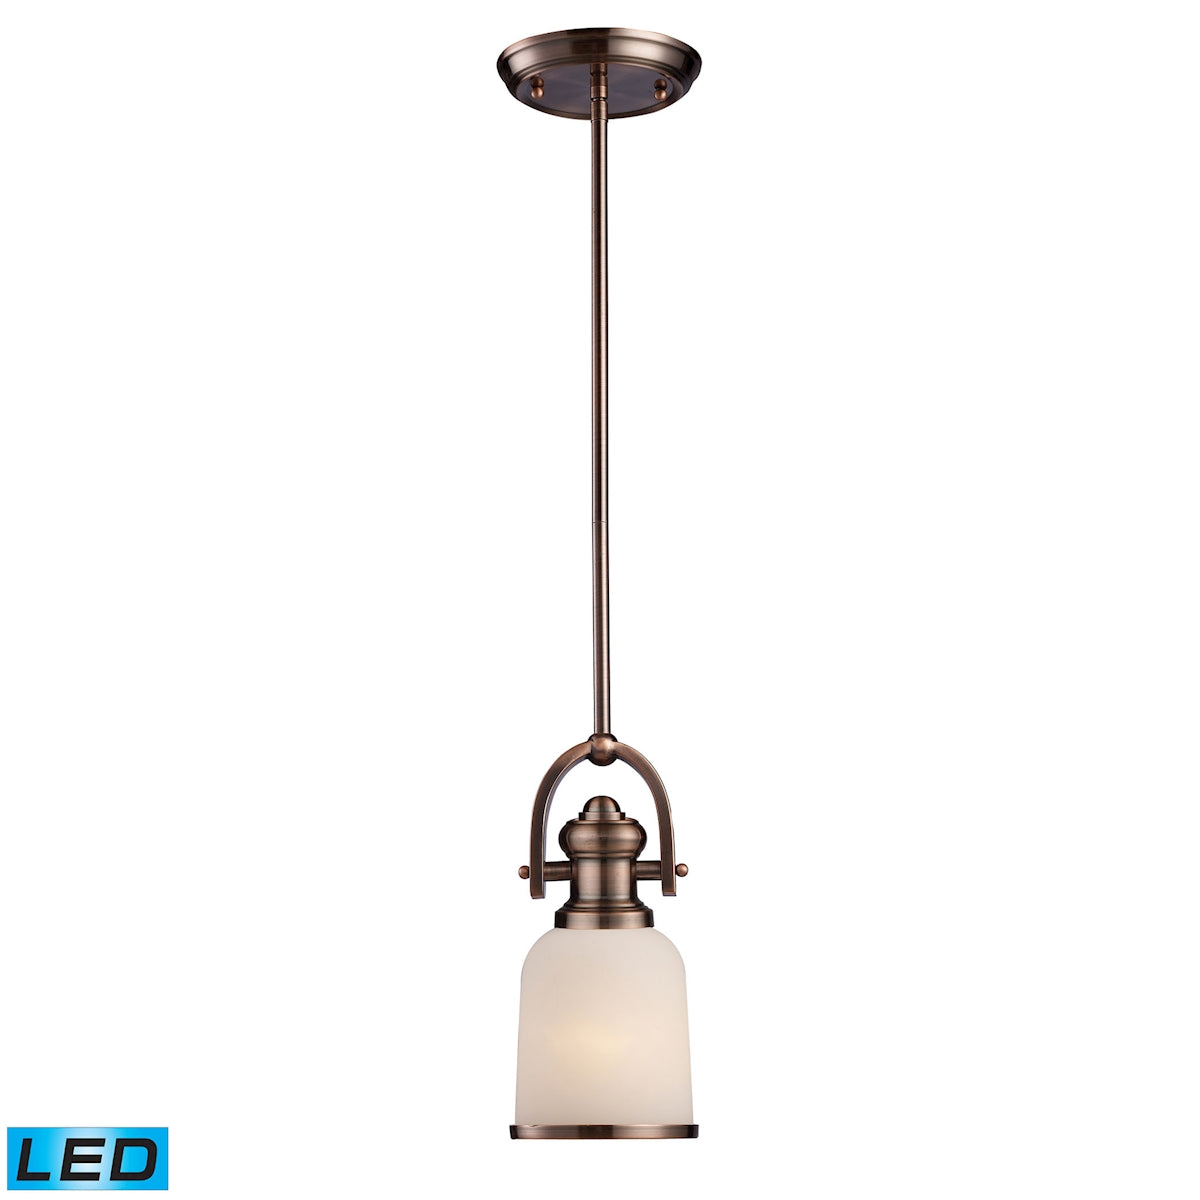 ELK Lighting 66181-1-LED Brooksdale 1-Light Mini Pendant in Antique Copper with White Glass - Includes LED Bulb